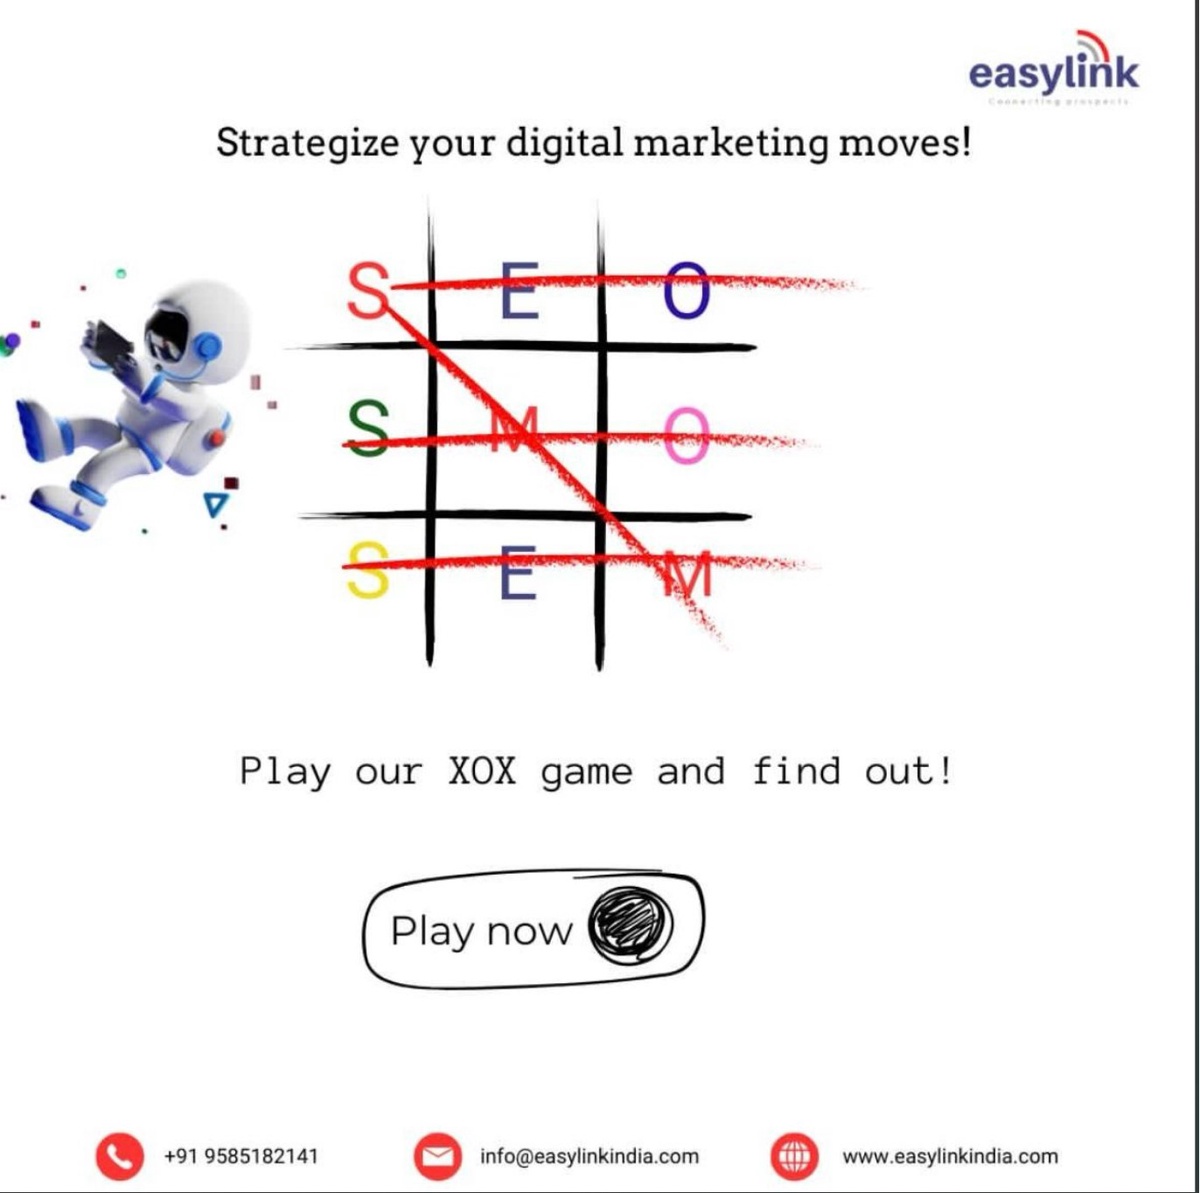 Strategize your digital marketing moves for success